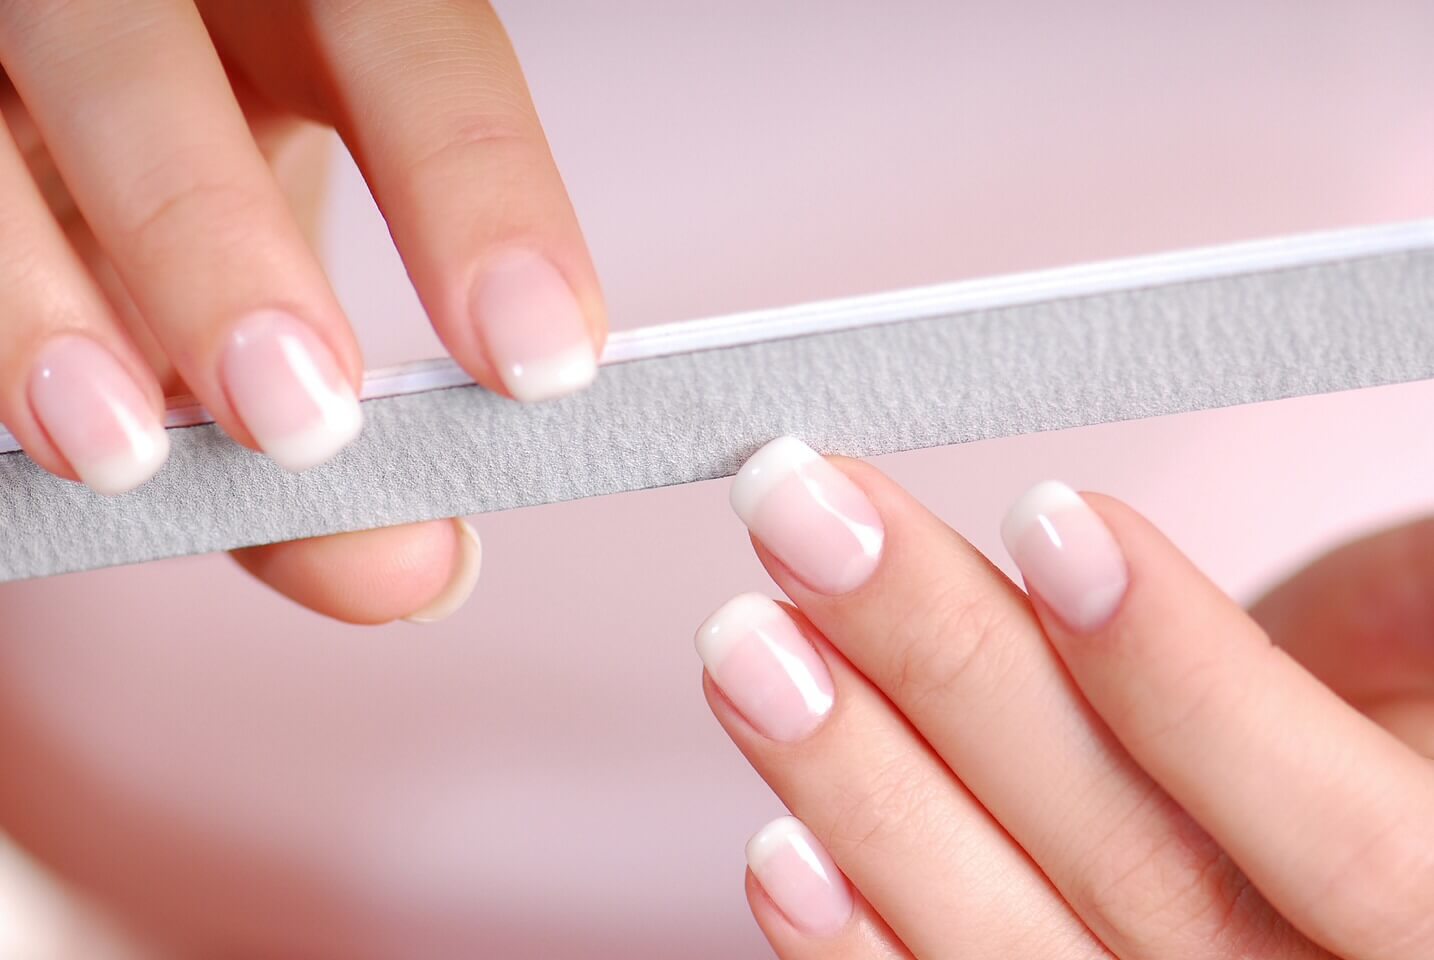 10. Nail strengthening treatment - wide 11